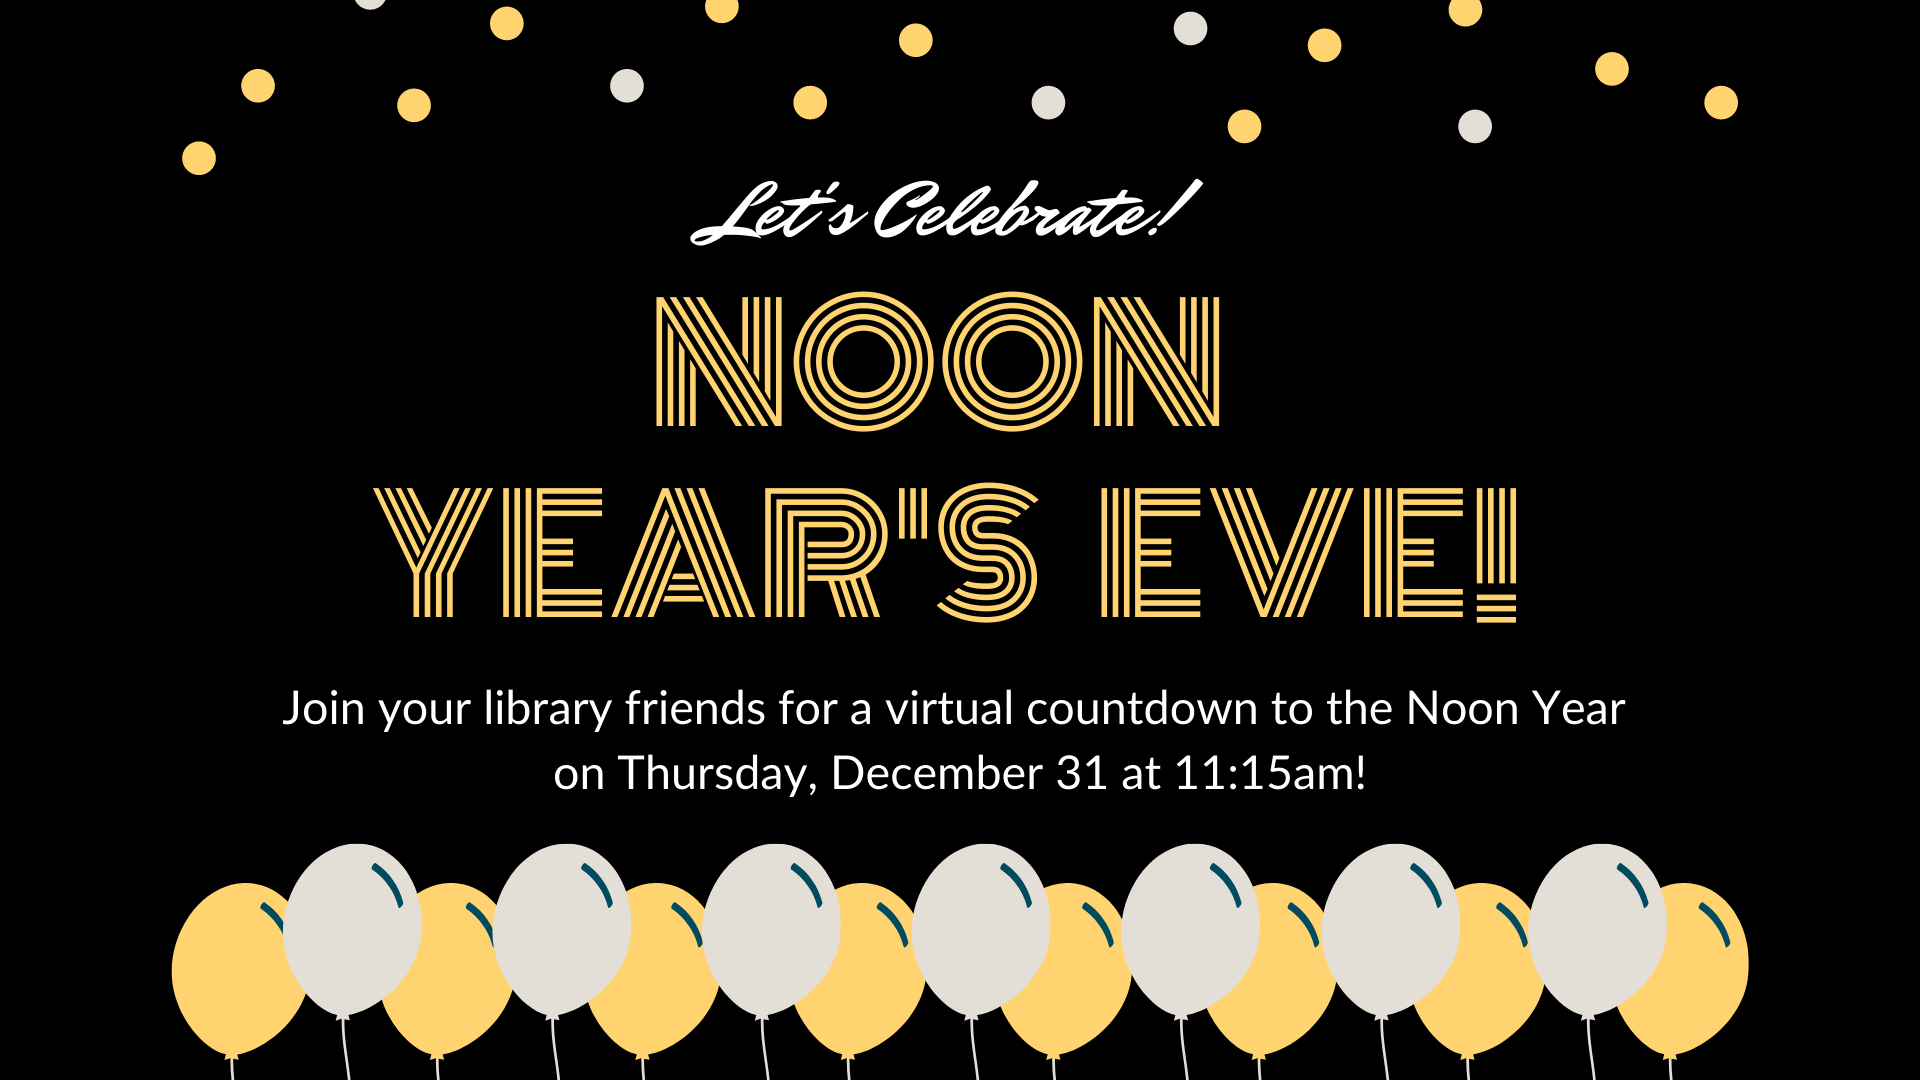 Let's celebrate Noon Year's Eve on December 31 at 11:15am!